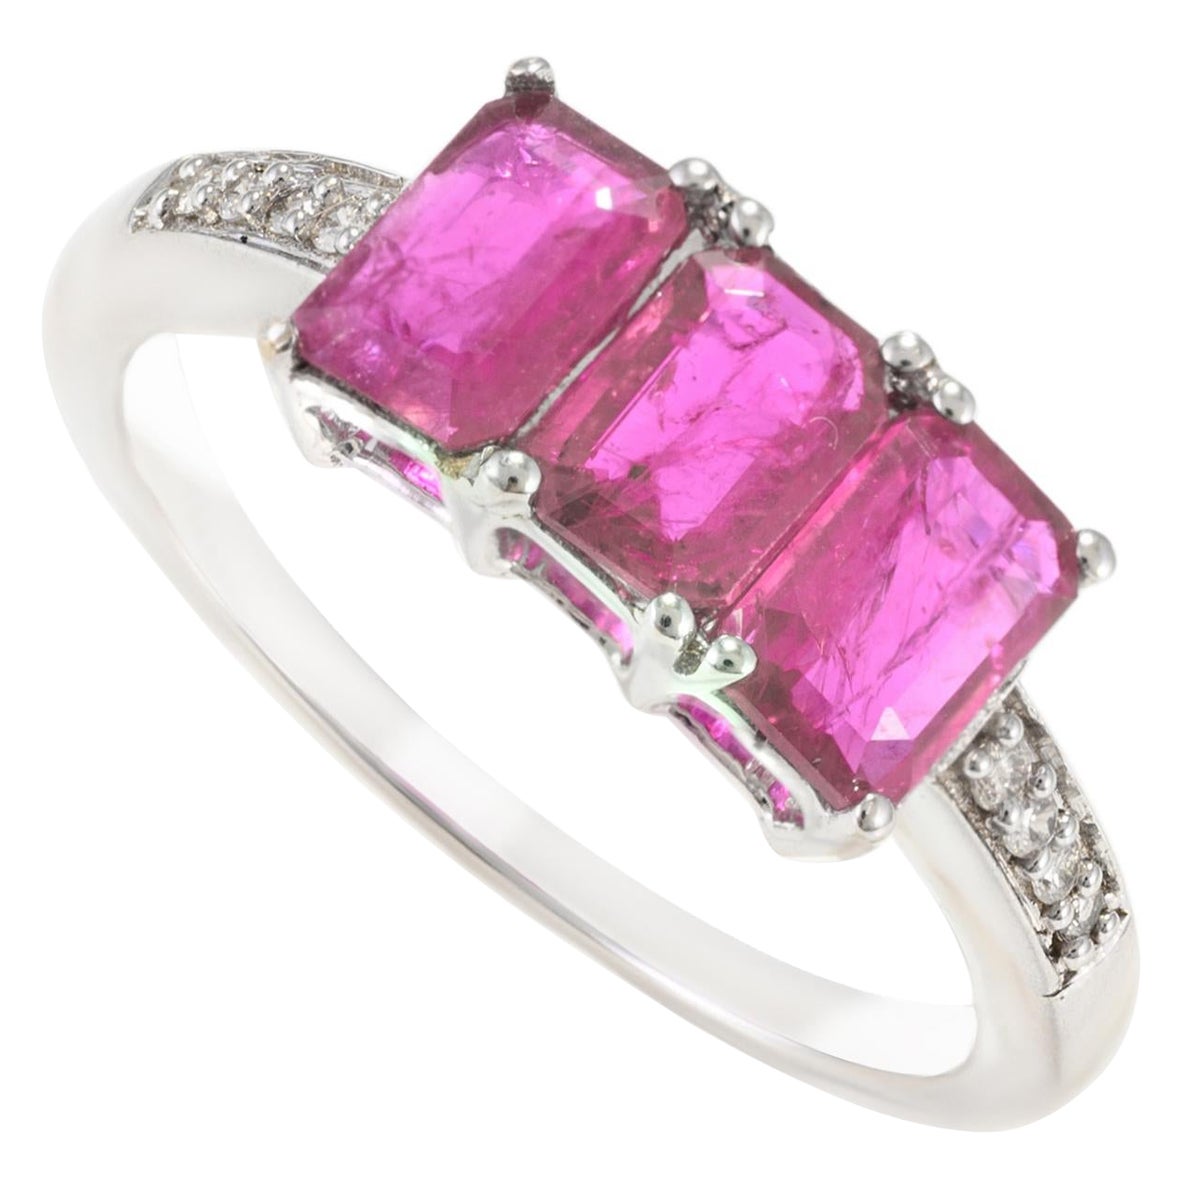 For Sale:  Three Stone Emerald Cut Ruby and Diamond Accent Ring in 14k White Gold